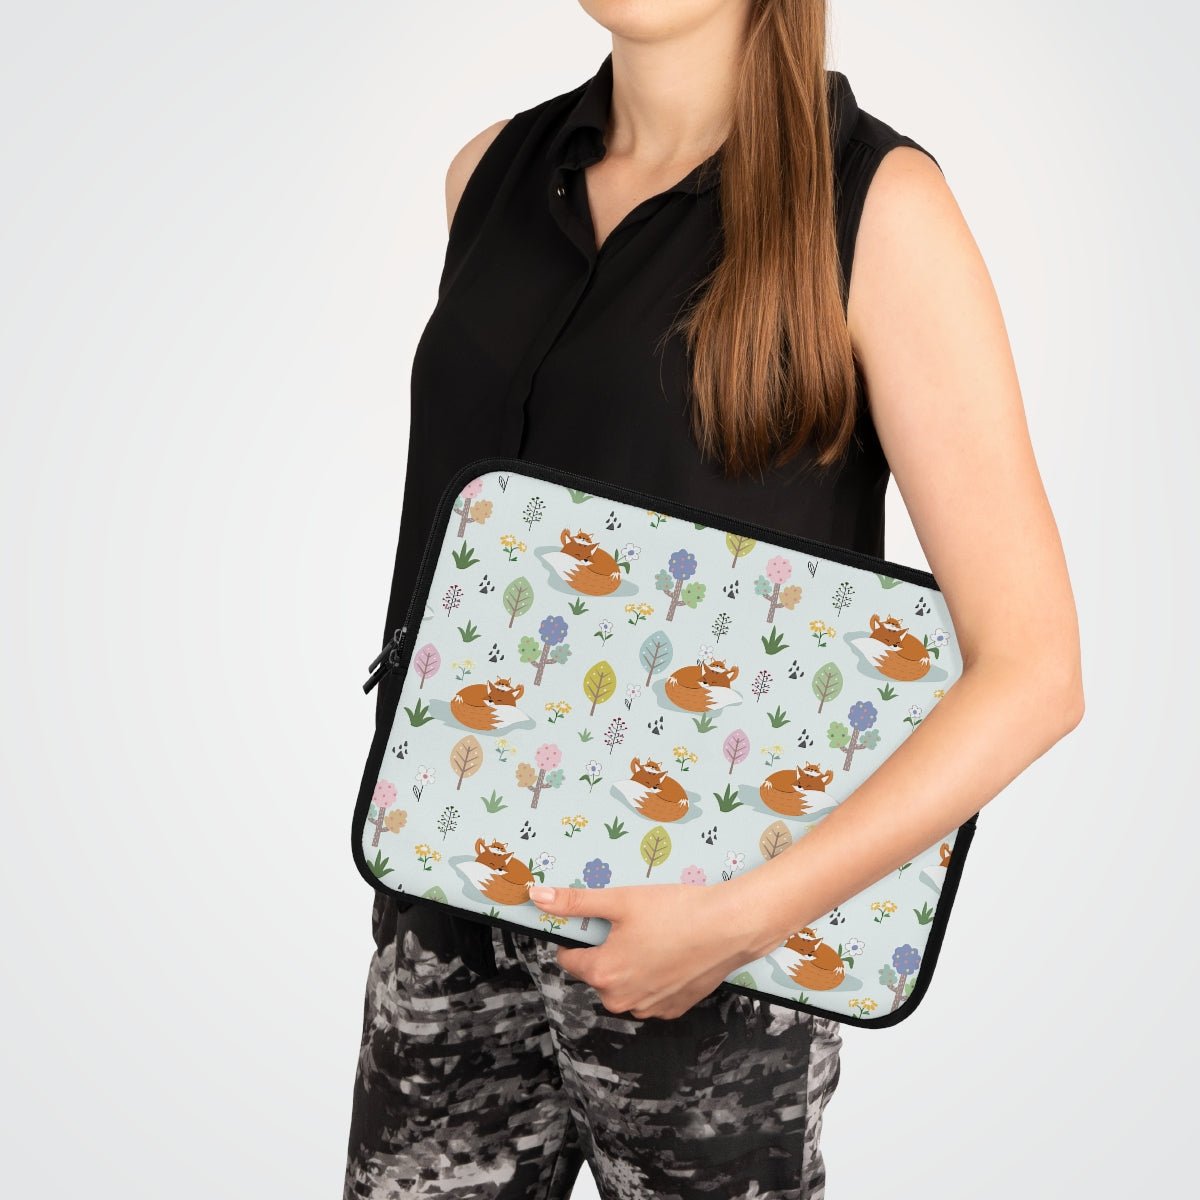 Mom and Baby Fox Laptop Sleeve - Puffin Lime